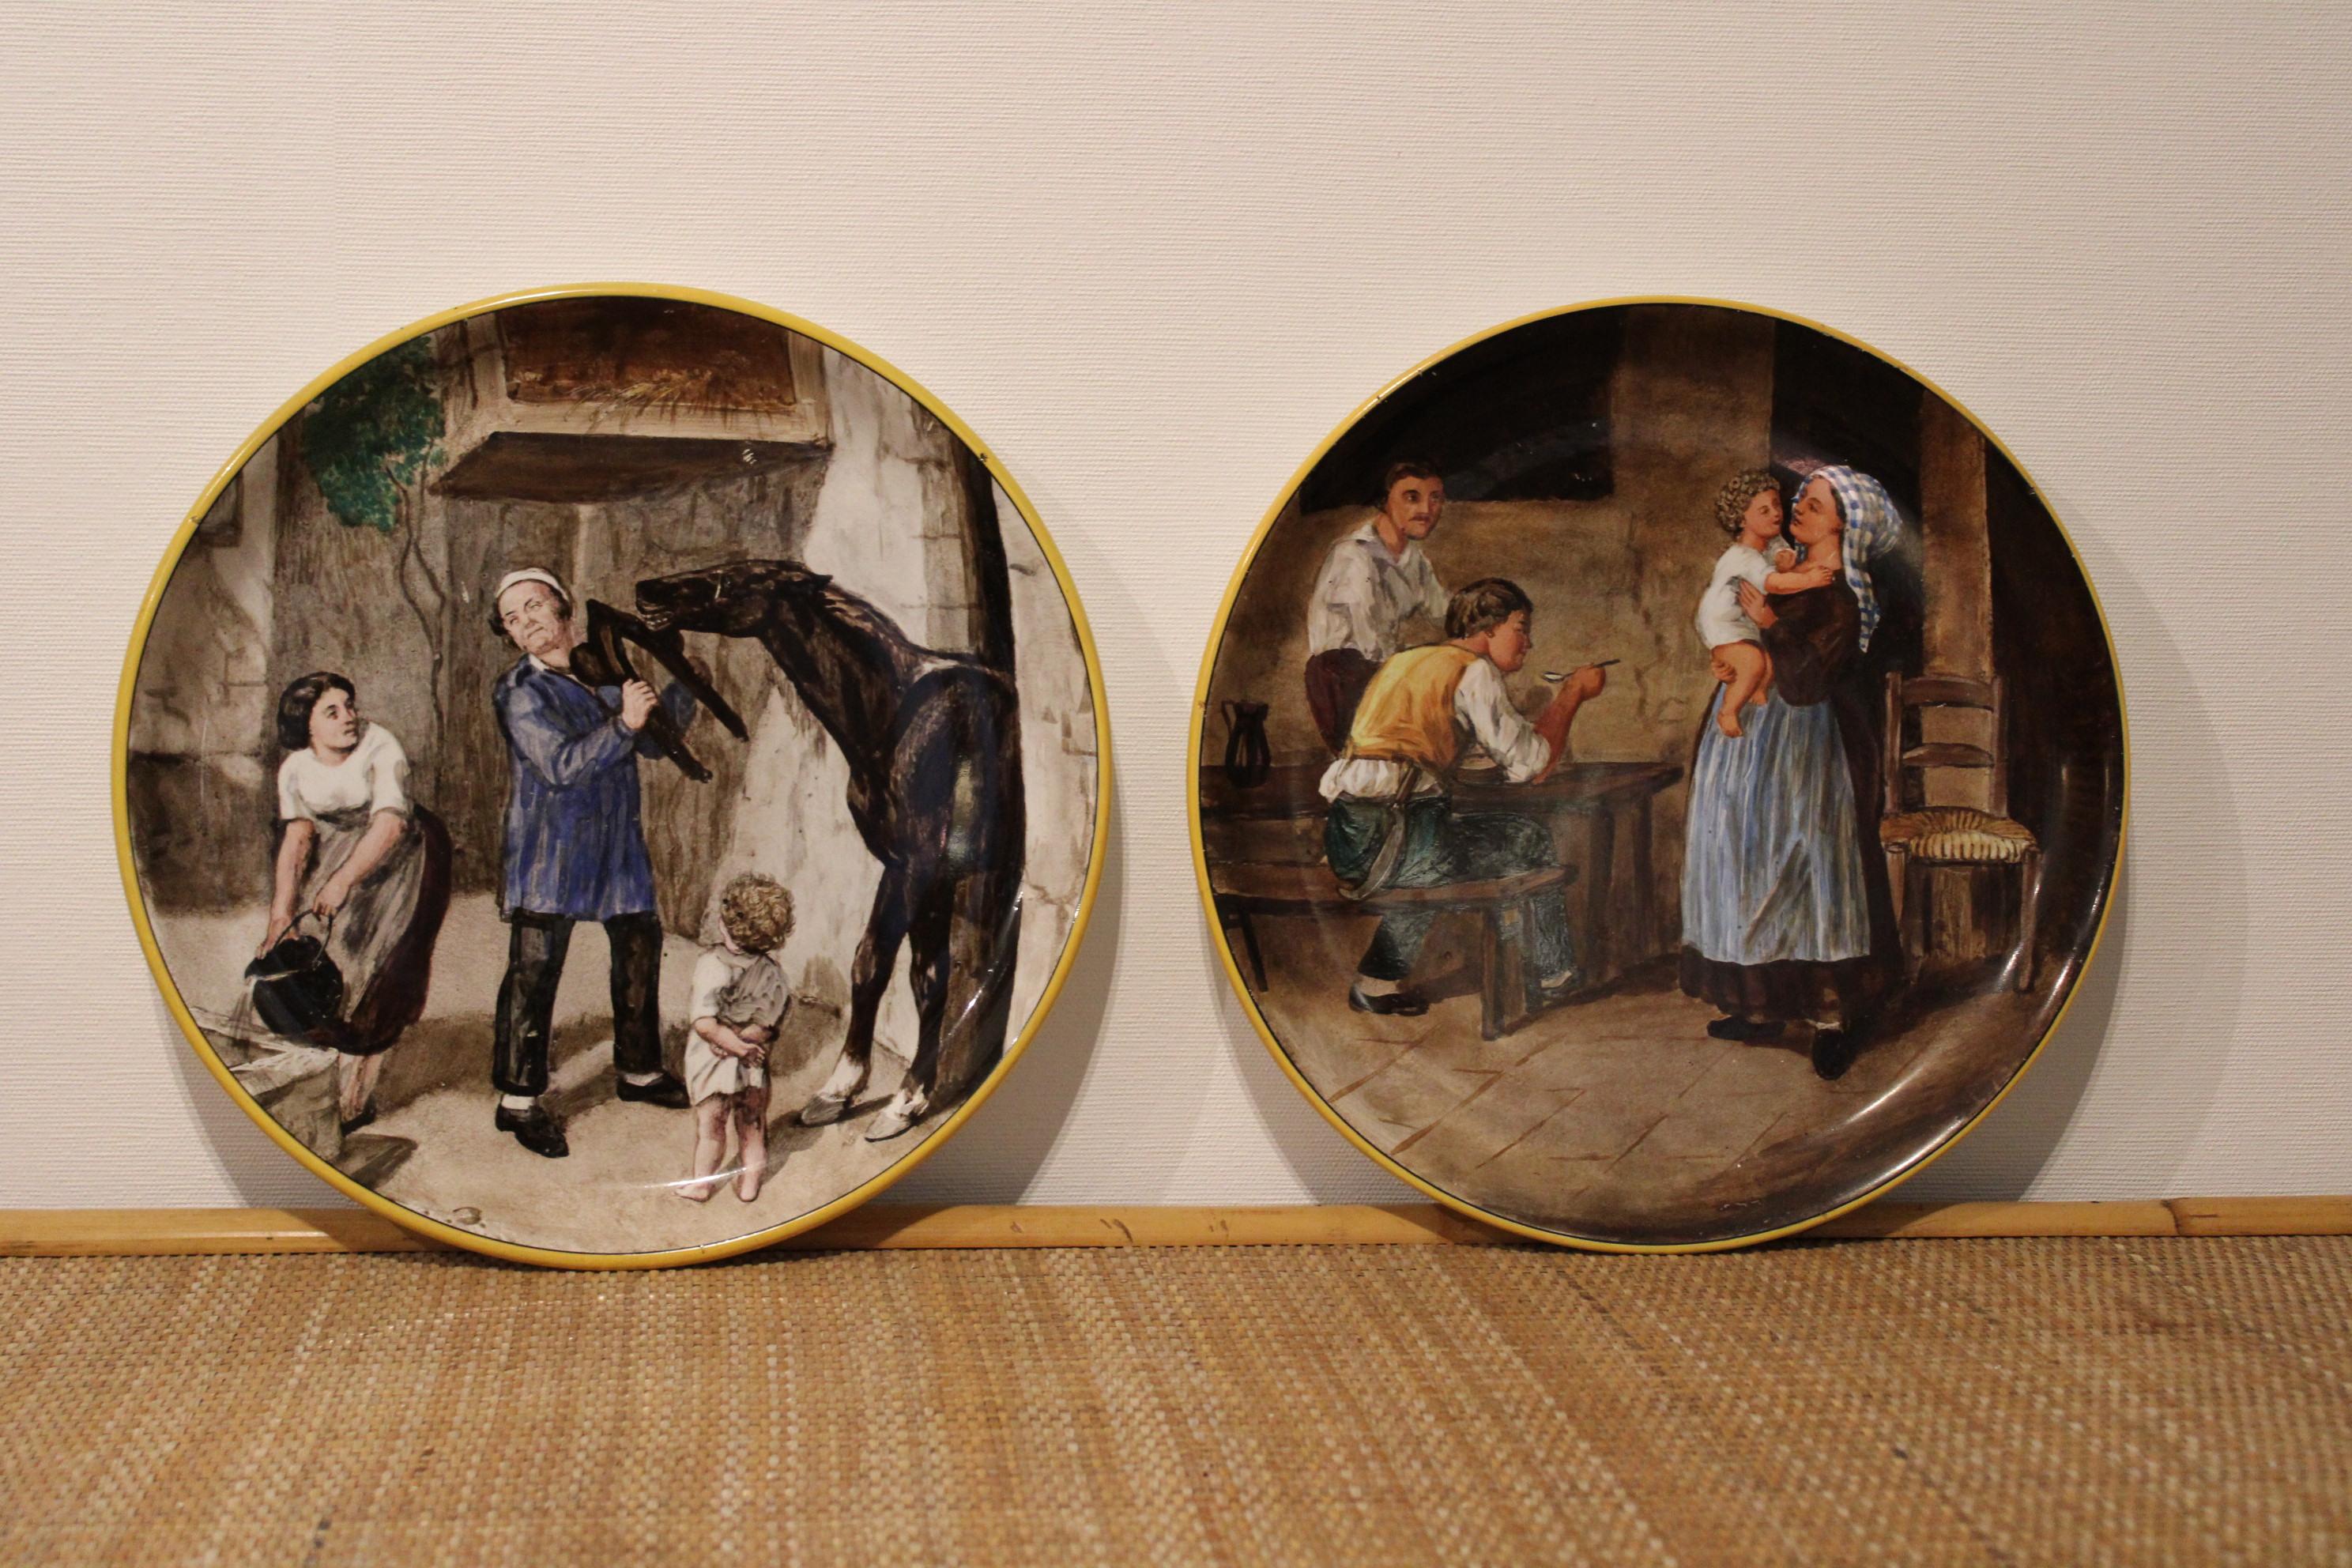 Pair of ceramic plates
Earthenware from Creil-Montereau, in France
Mark 